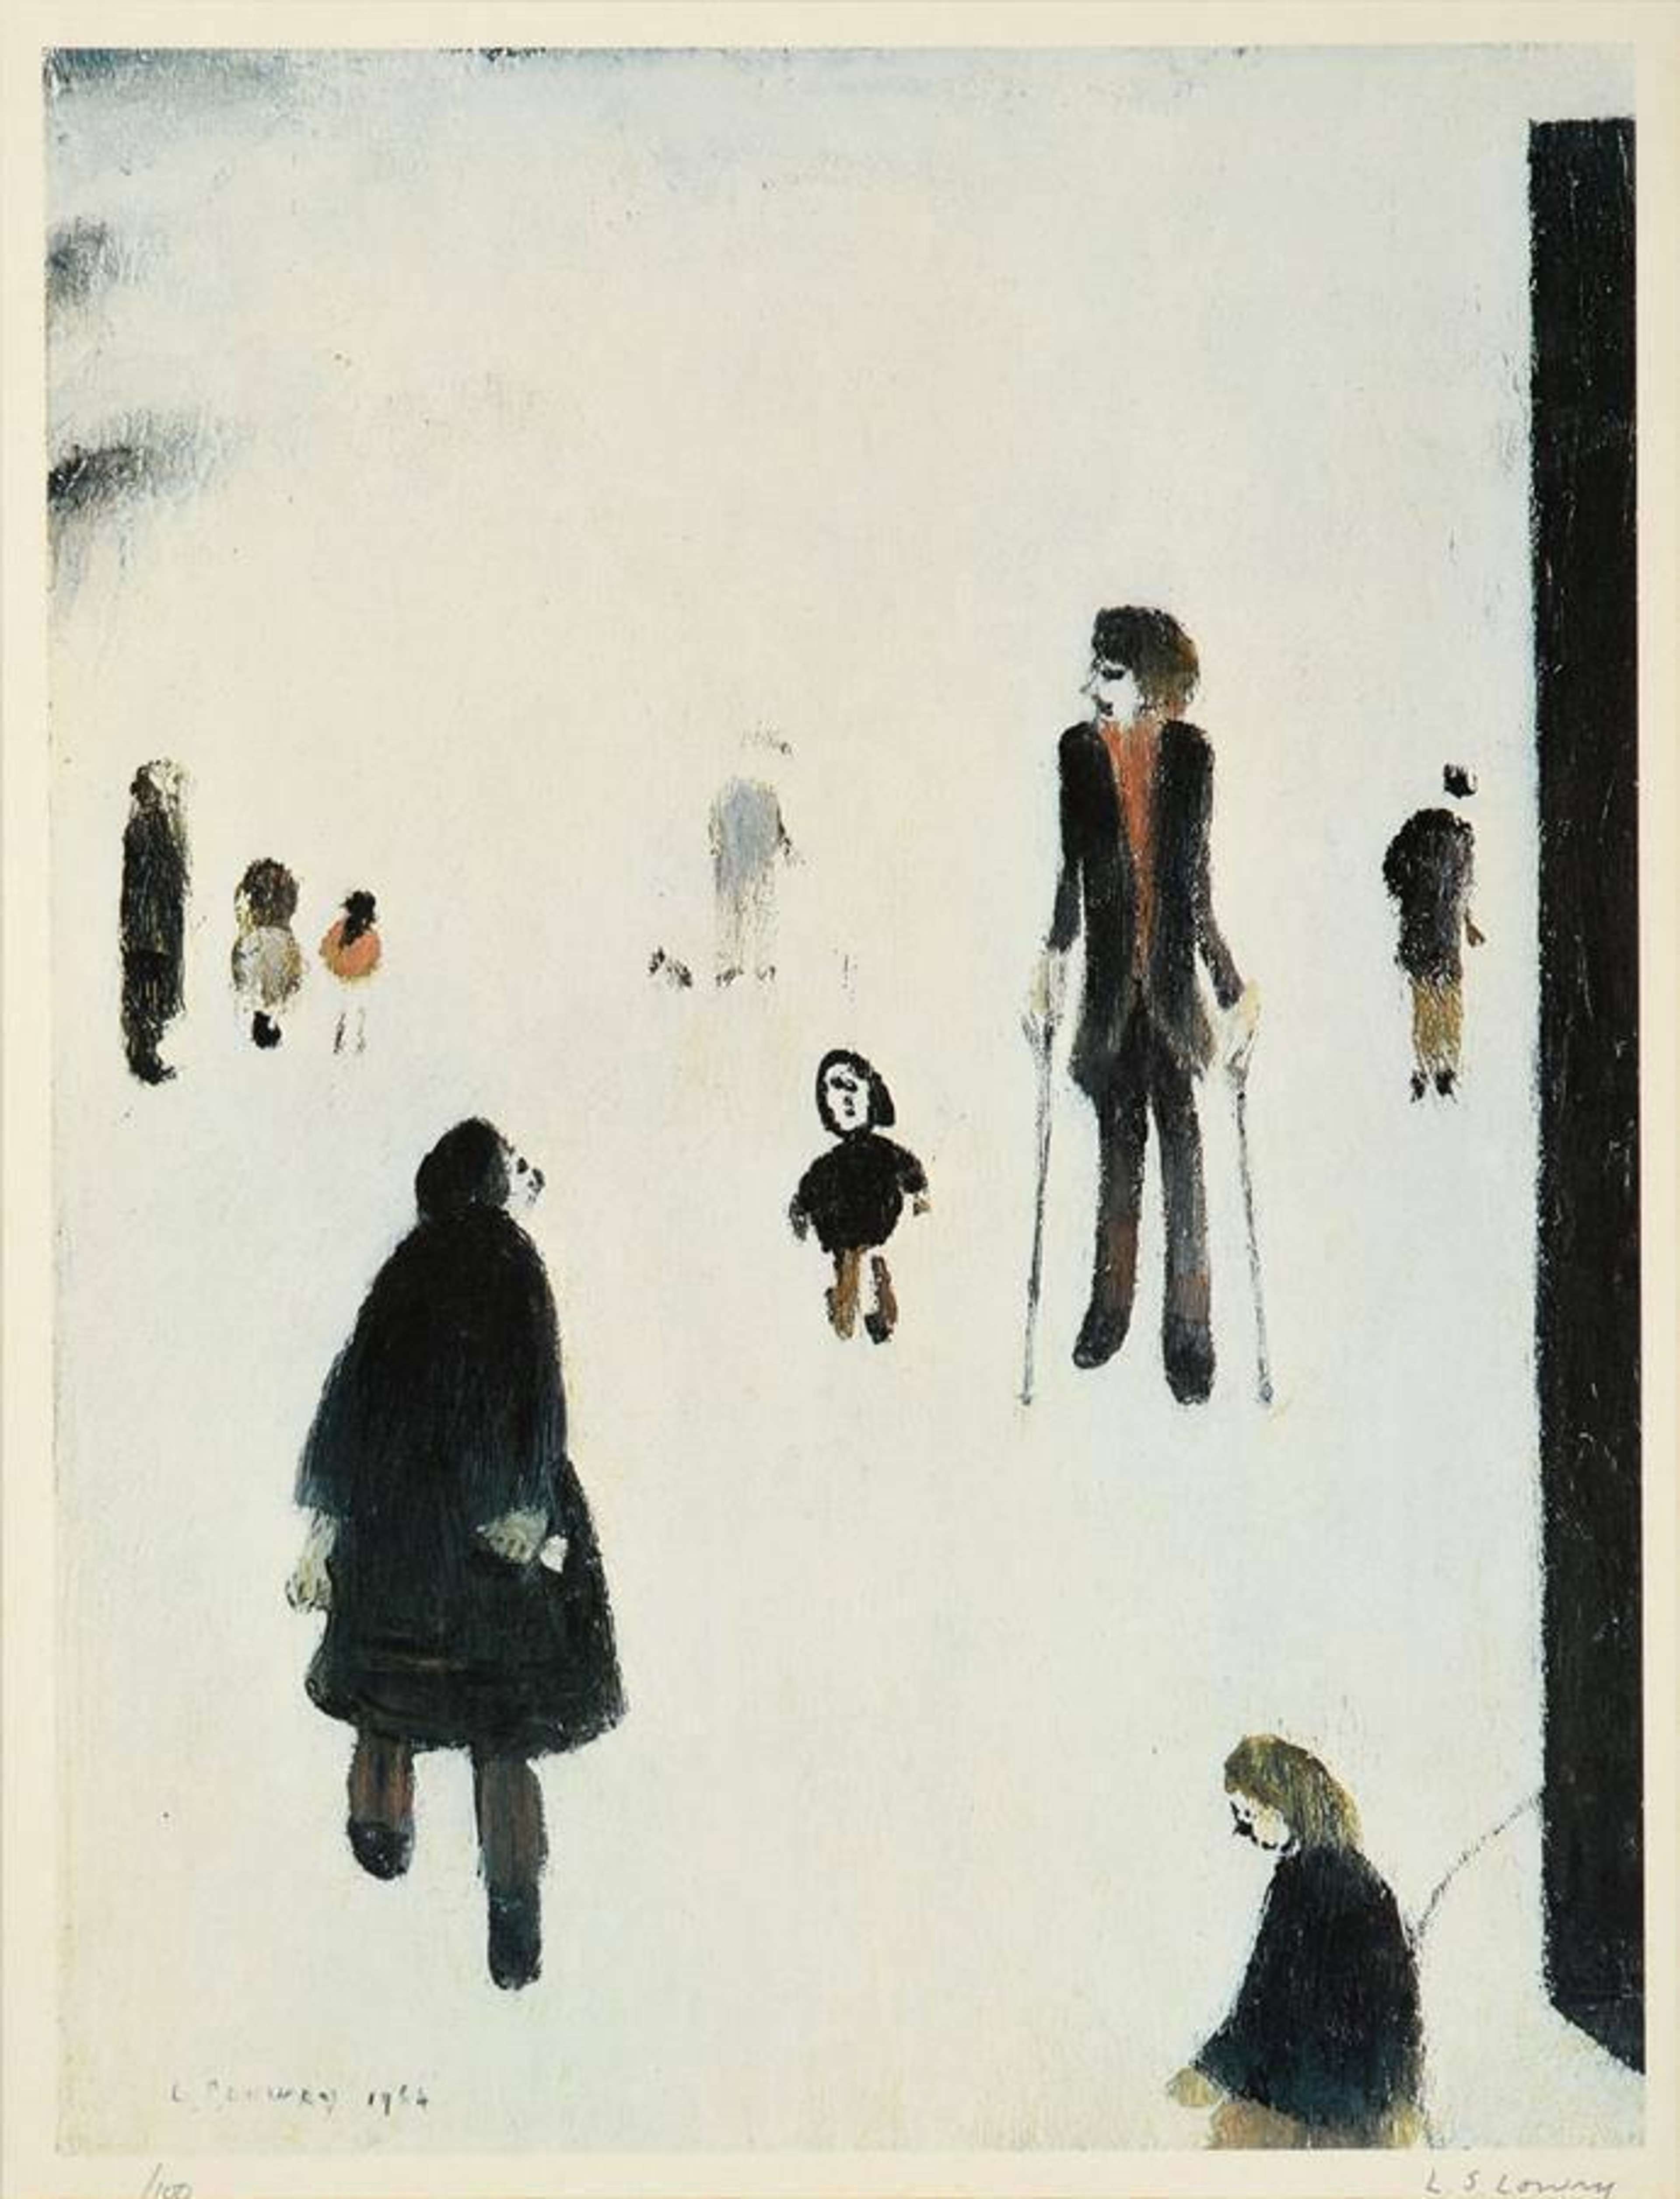 Figures In The Park is a lithograph by L. S. Lowry that shows a variety of figures against a white background that reveals no situational context. 